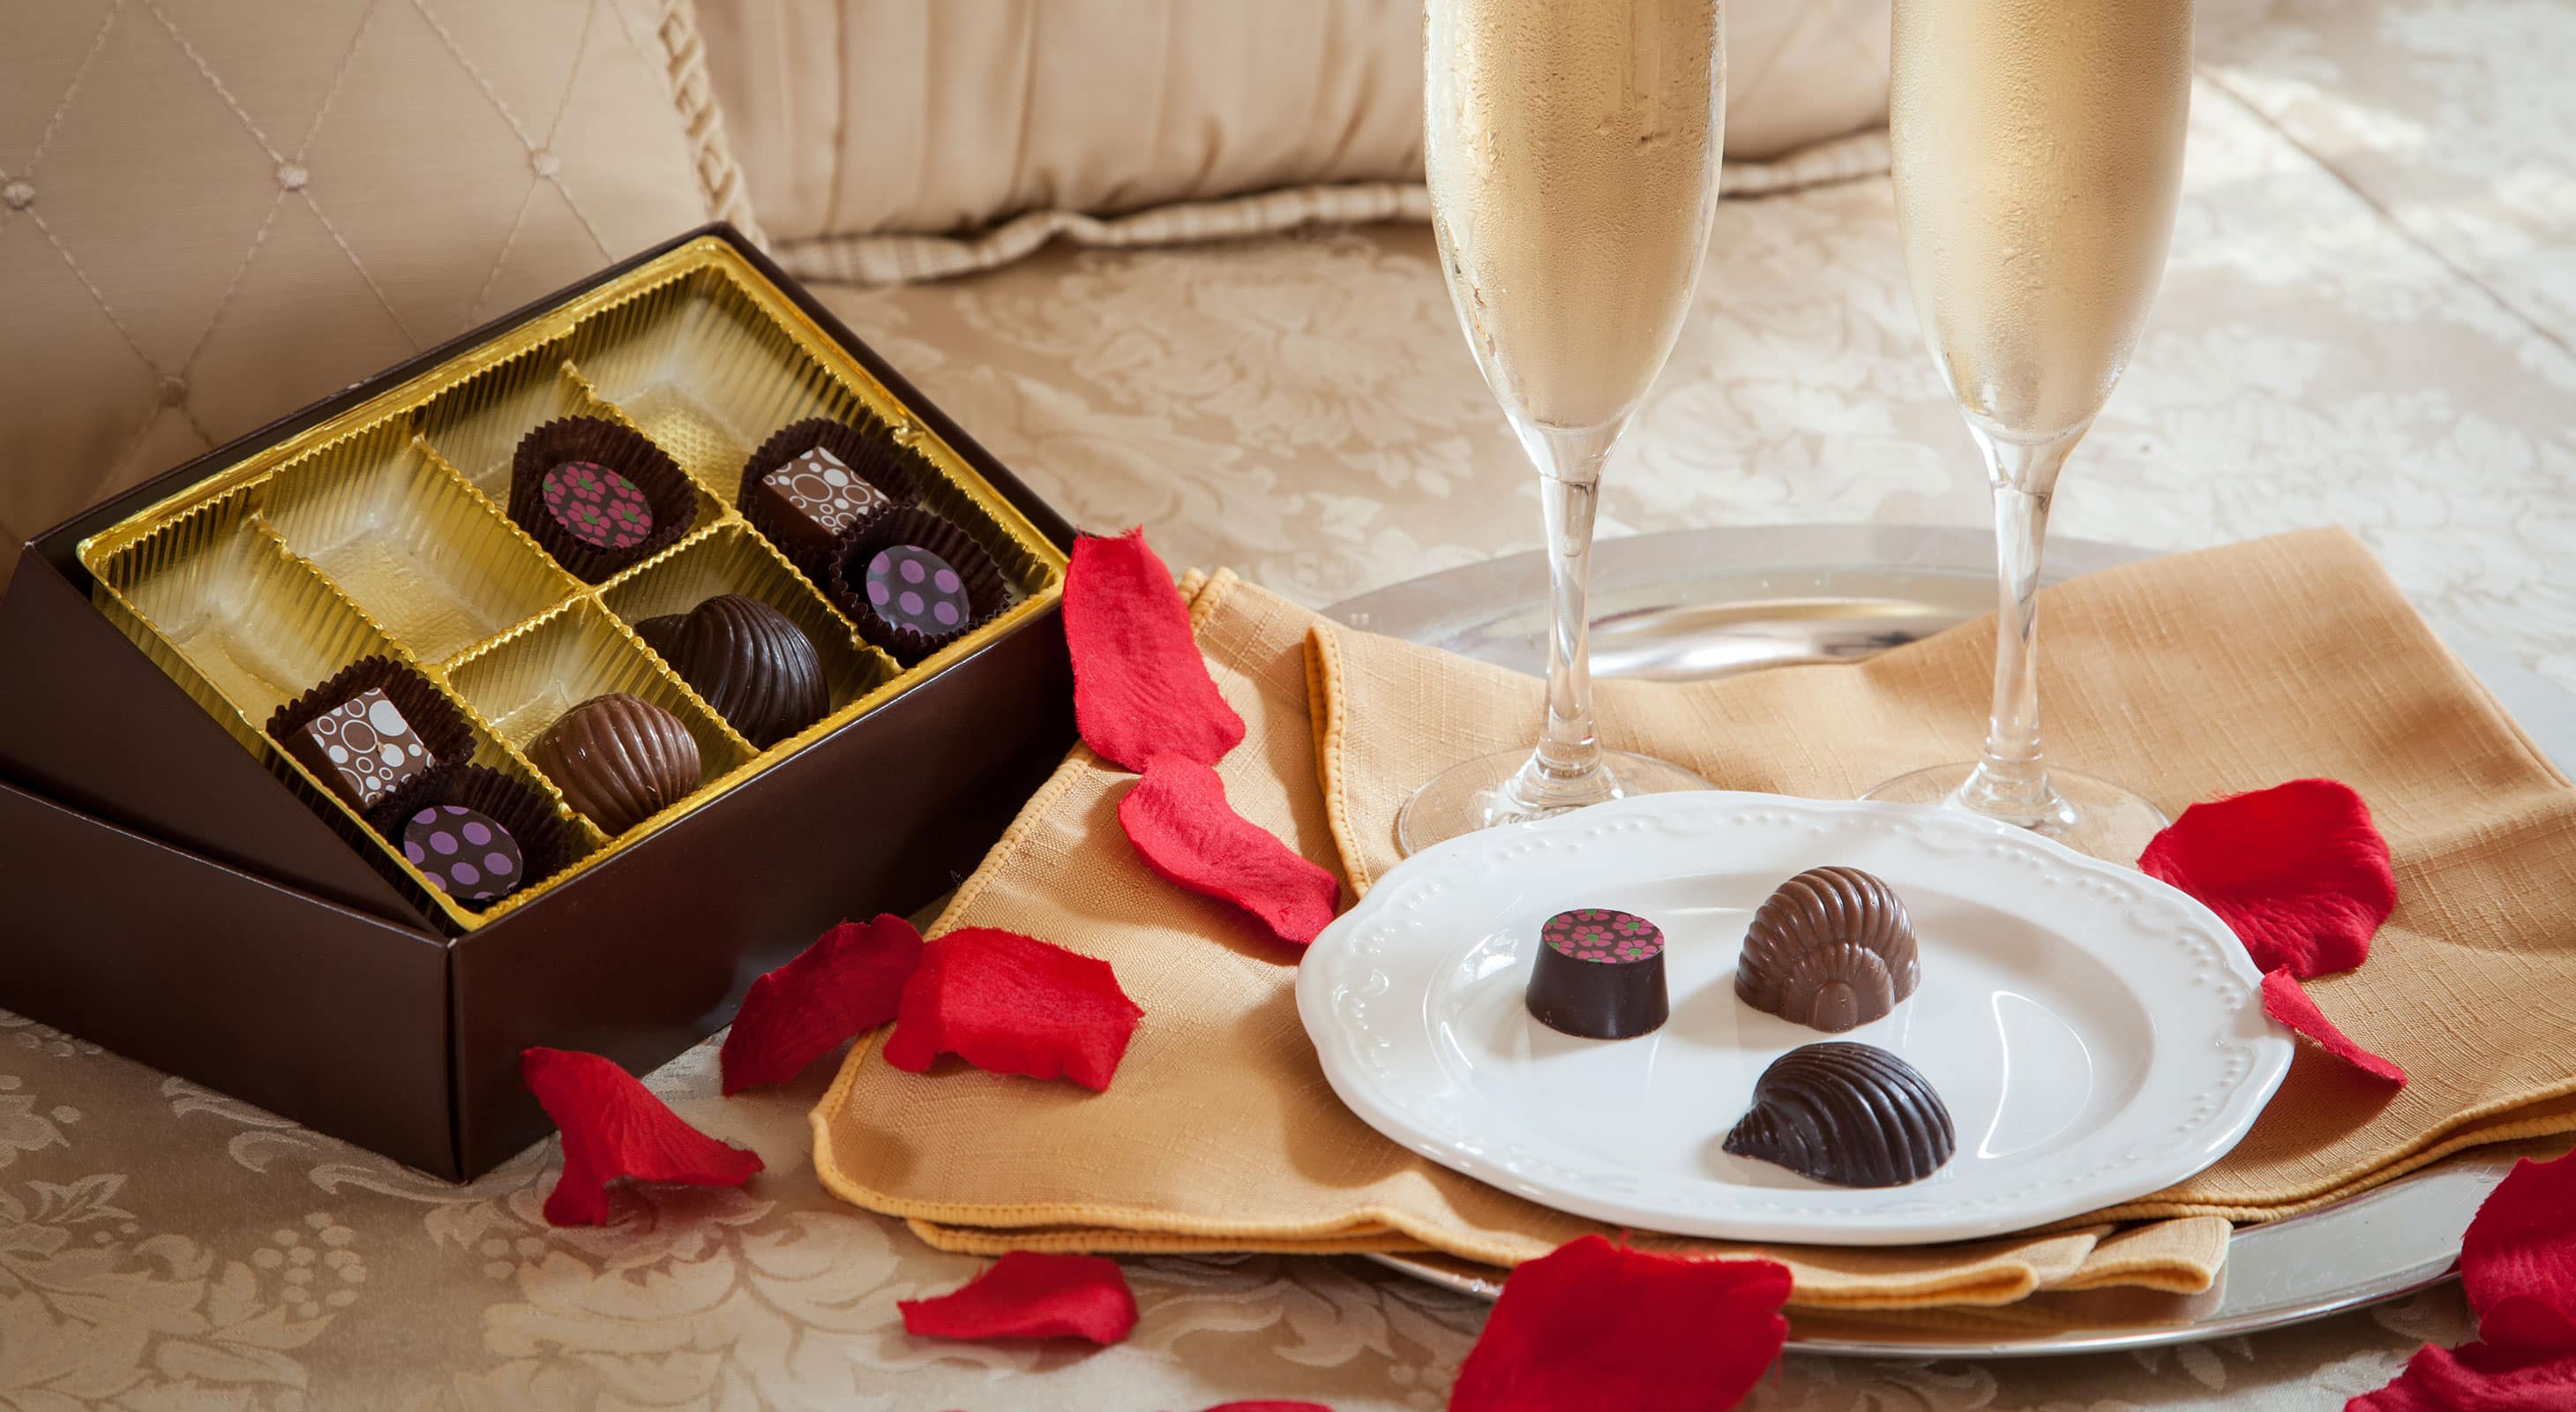 Pair of champagne glasses with plate and tray of delicious chocolates